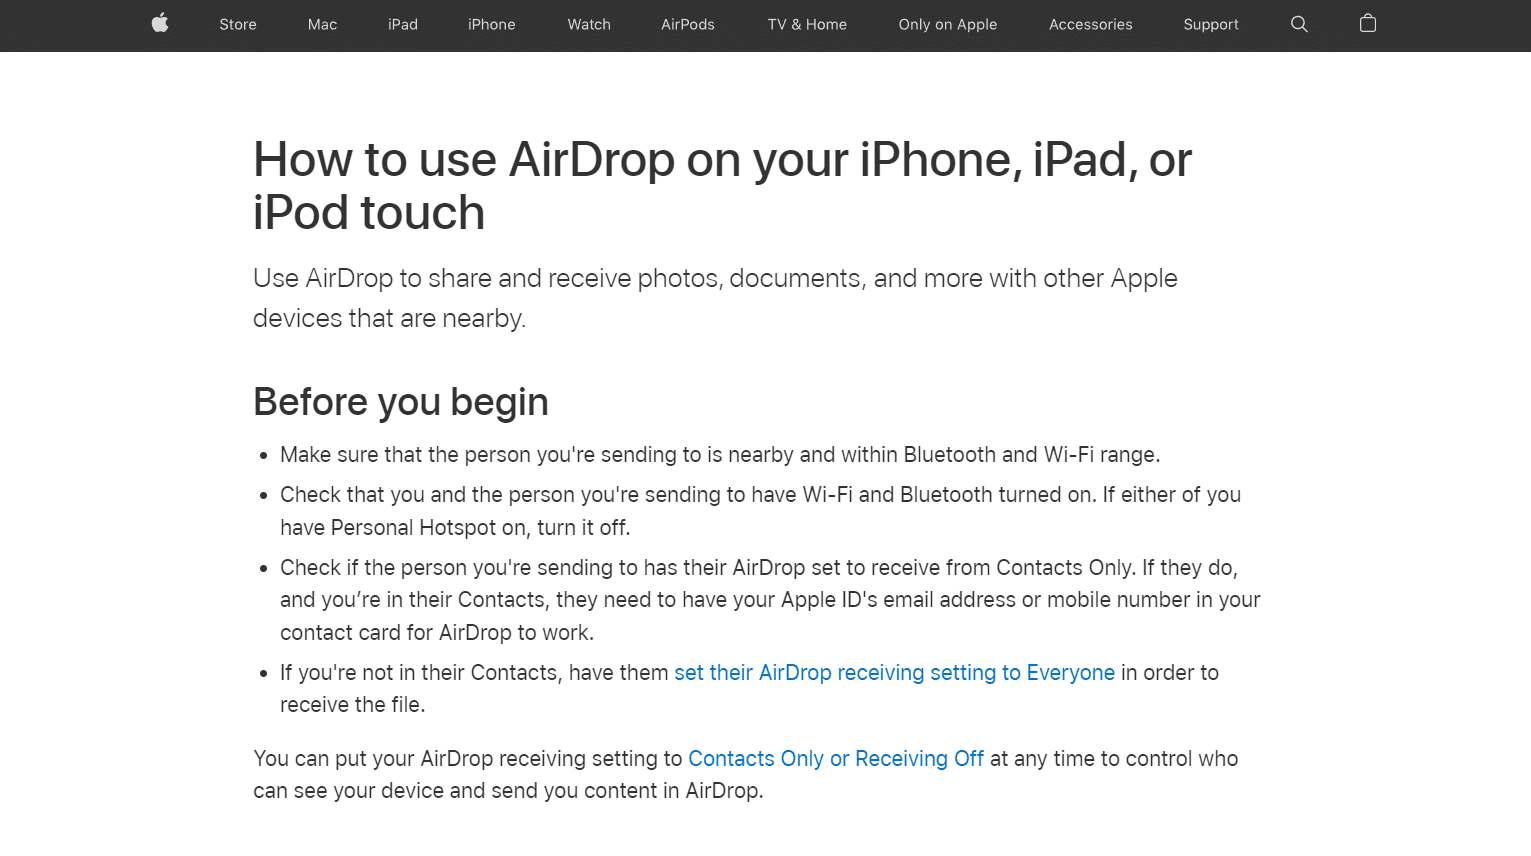 How to use AirDrop feature